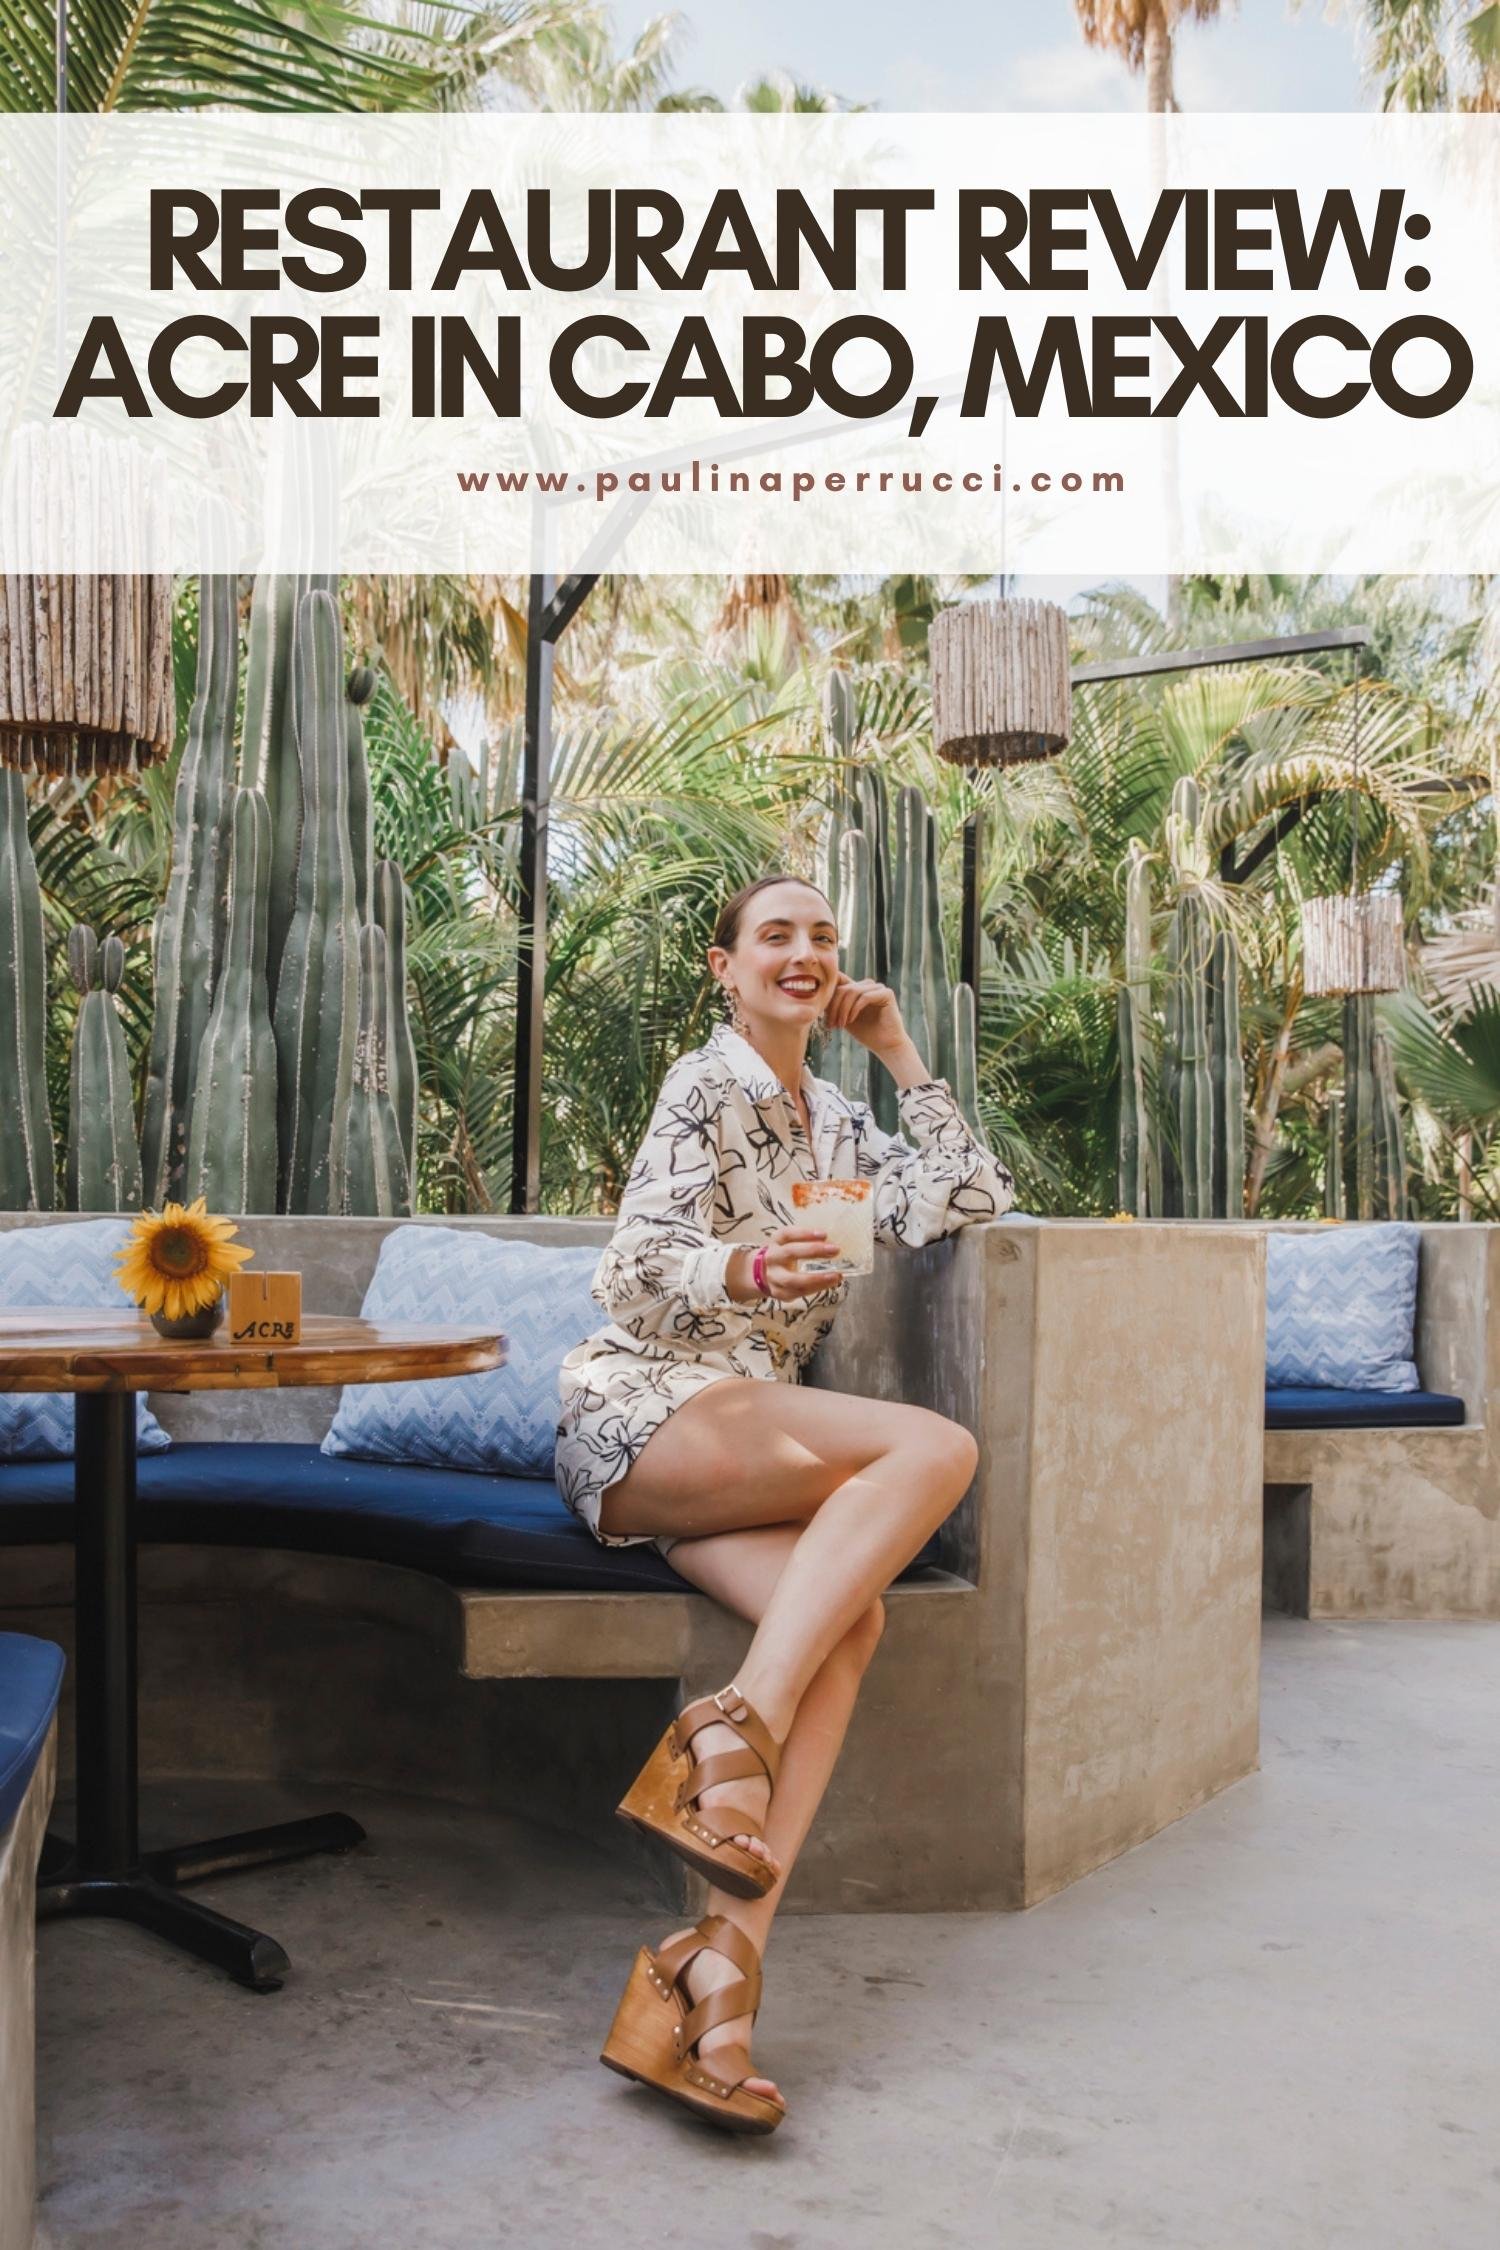 Restaurant Review: Acres in Cabo, Mexico 